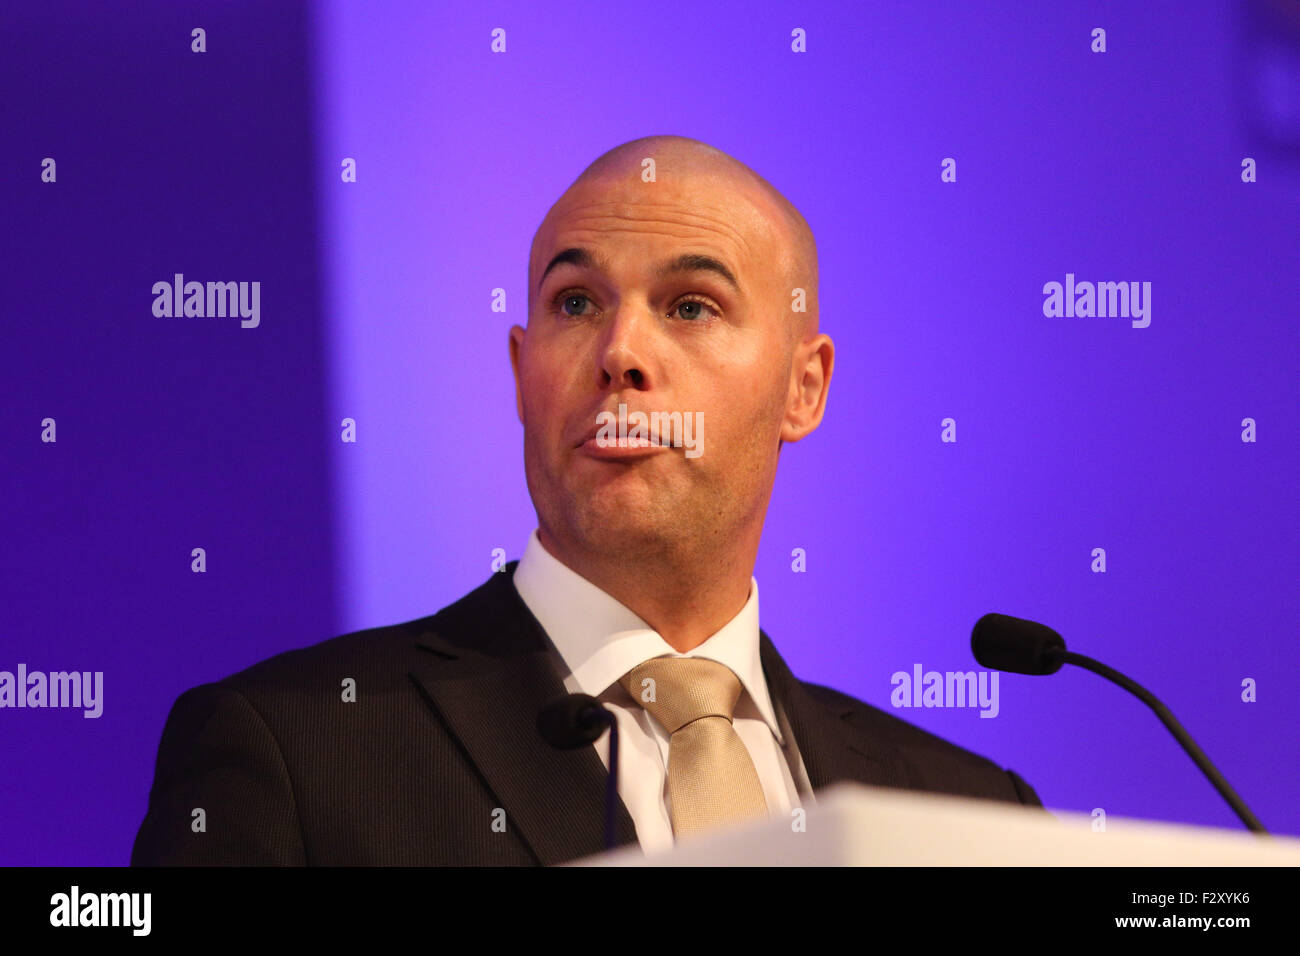 Doncaster, South Yorkshire, UK. 25th September, 2015. Jeremy Van Klaveren, Dutch MP as a member of the Party for Freedom, speaks at the UKIP National Conference in Doncaster South Yorkshire, UK. 25th September 2015. The party's annual conference was the stage for the unveiling of a new campaign force called 'Leave EU'. Consisting of pressure groups and think tanks with thousands of activists between them it will aim to end the UK’s ties with Brussels.  Ian Hinchliffe / /Alamy Live News Stock Photo